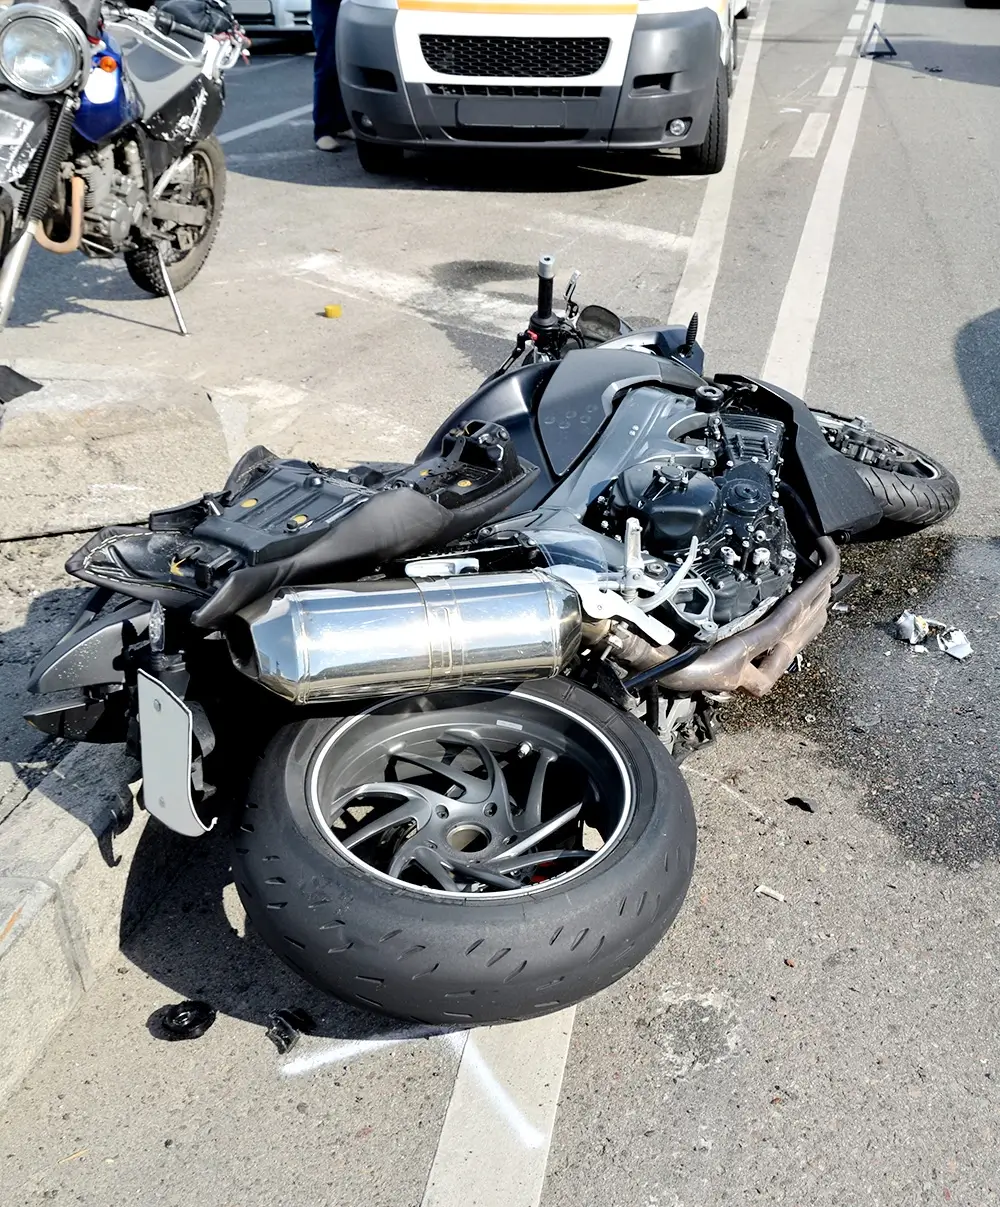 Motorcycle accident on pavement